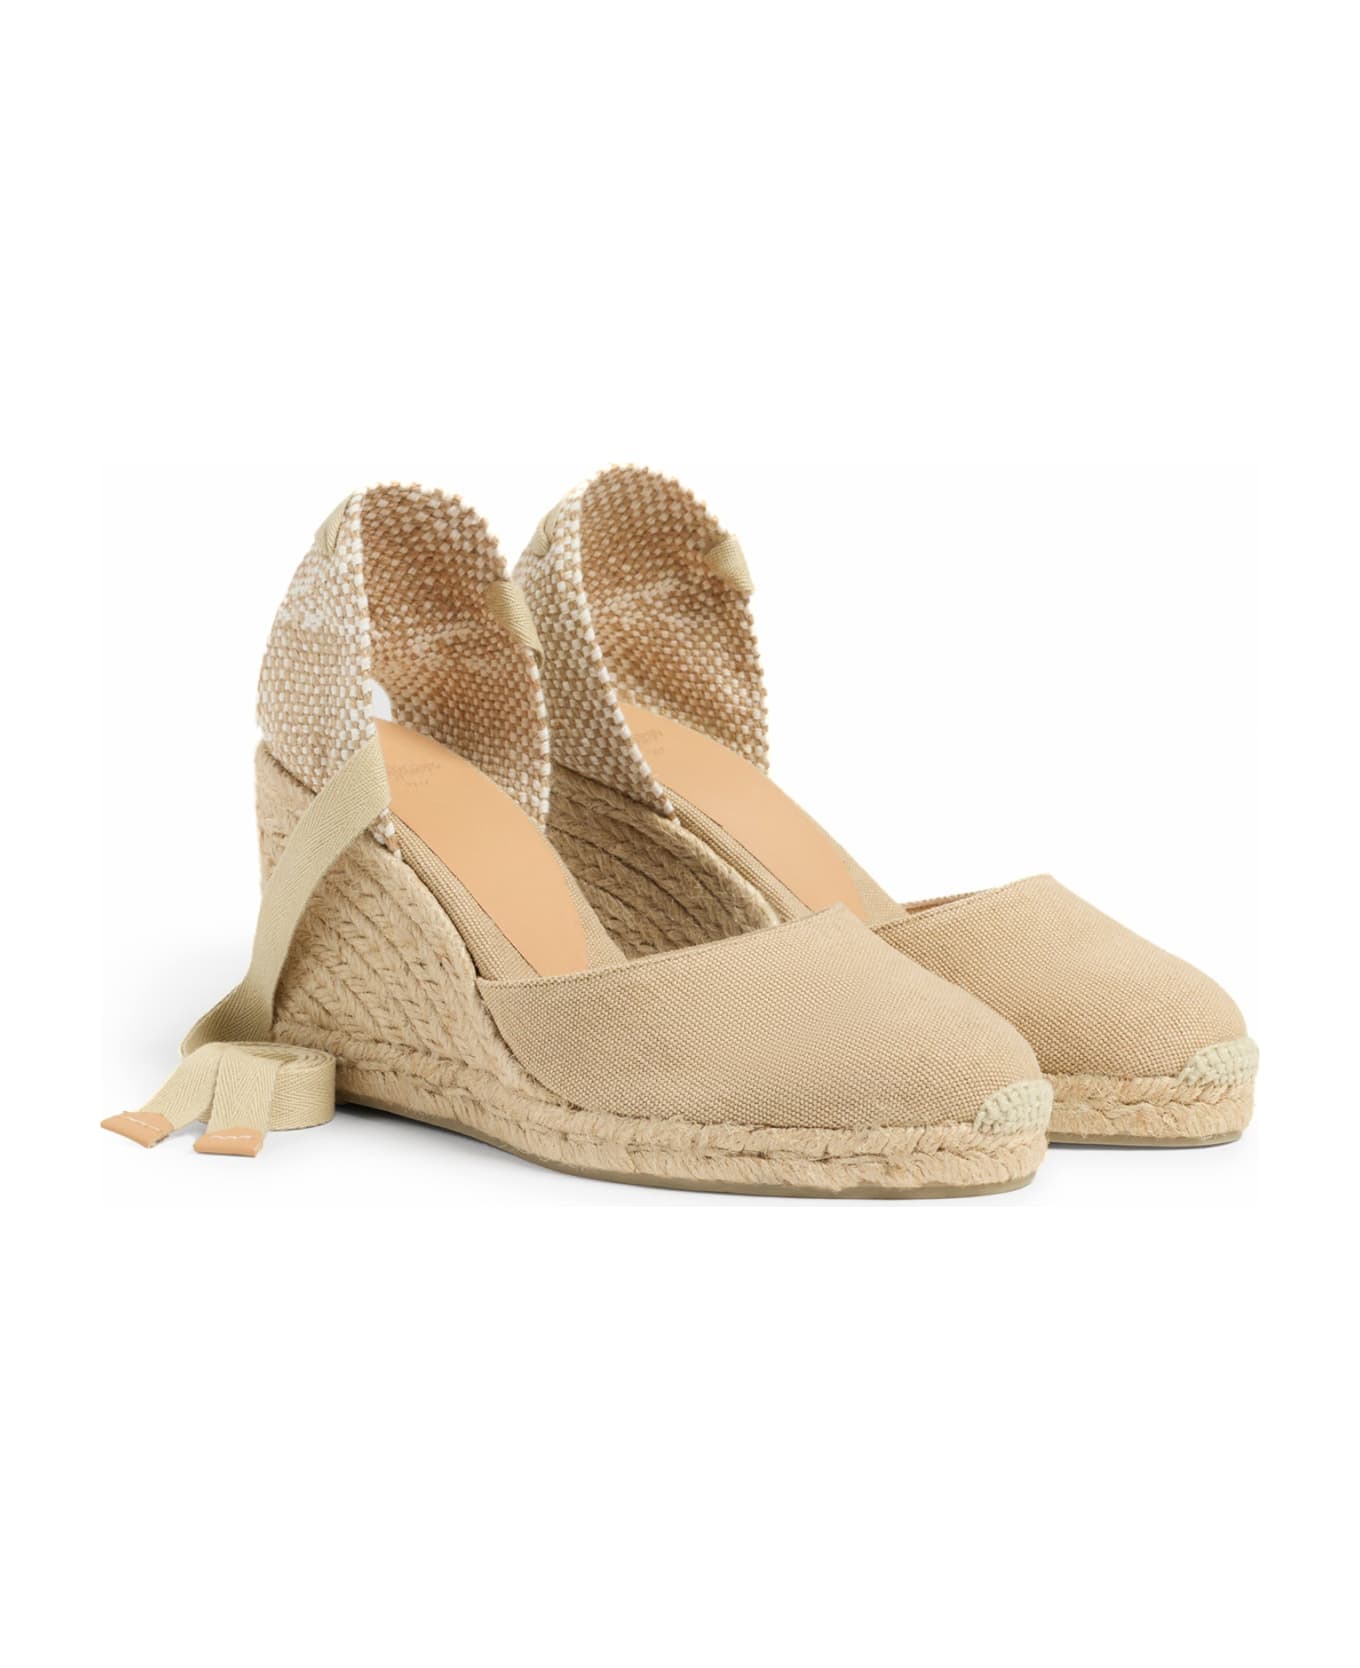 Castañer Espadrilles Carina With Wedge And Laces - SAND